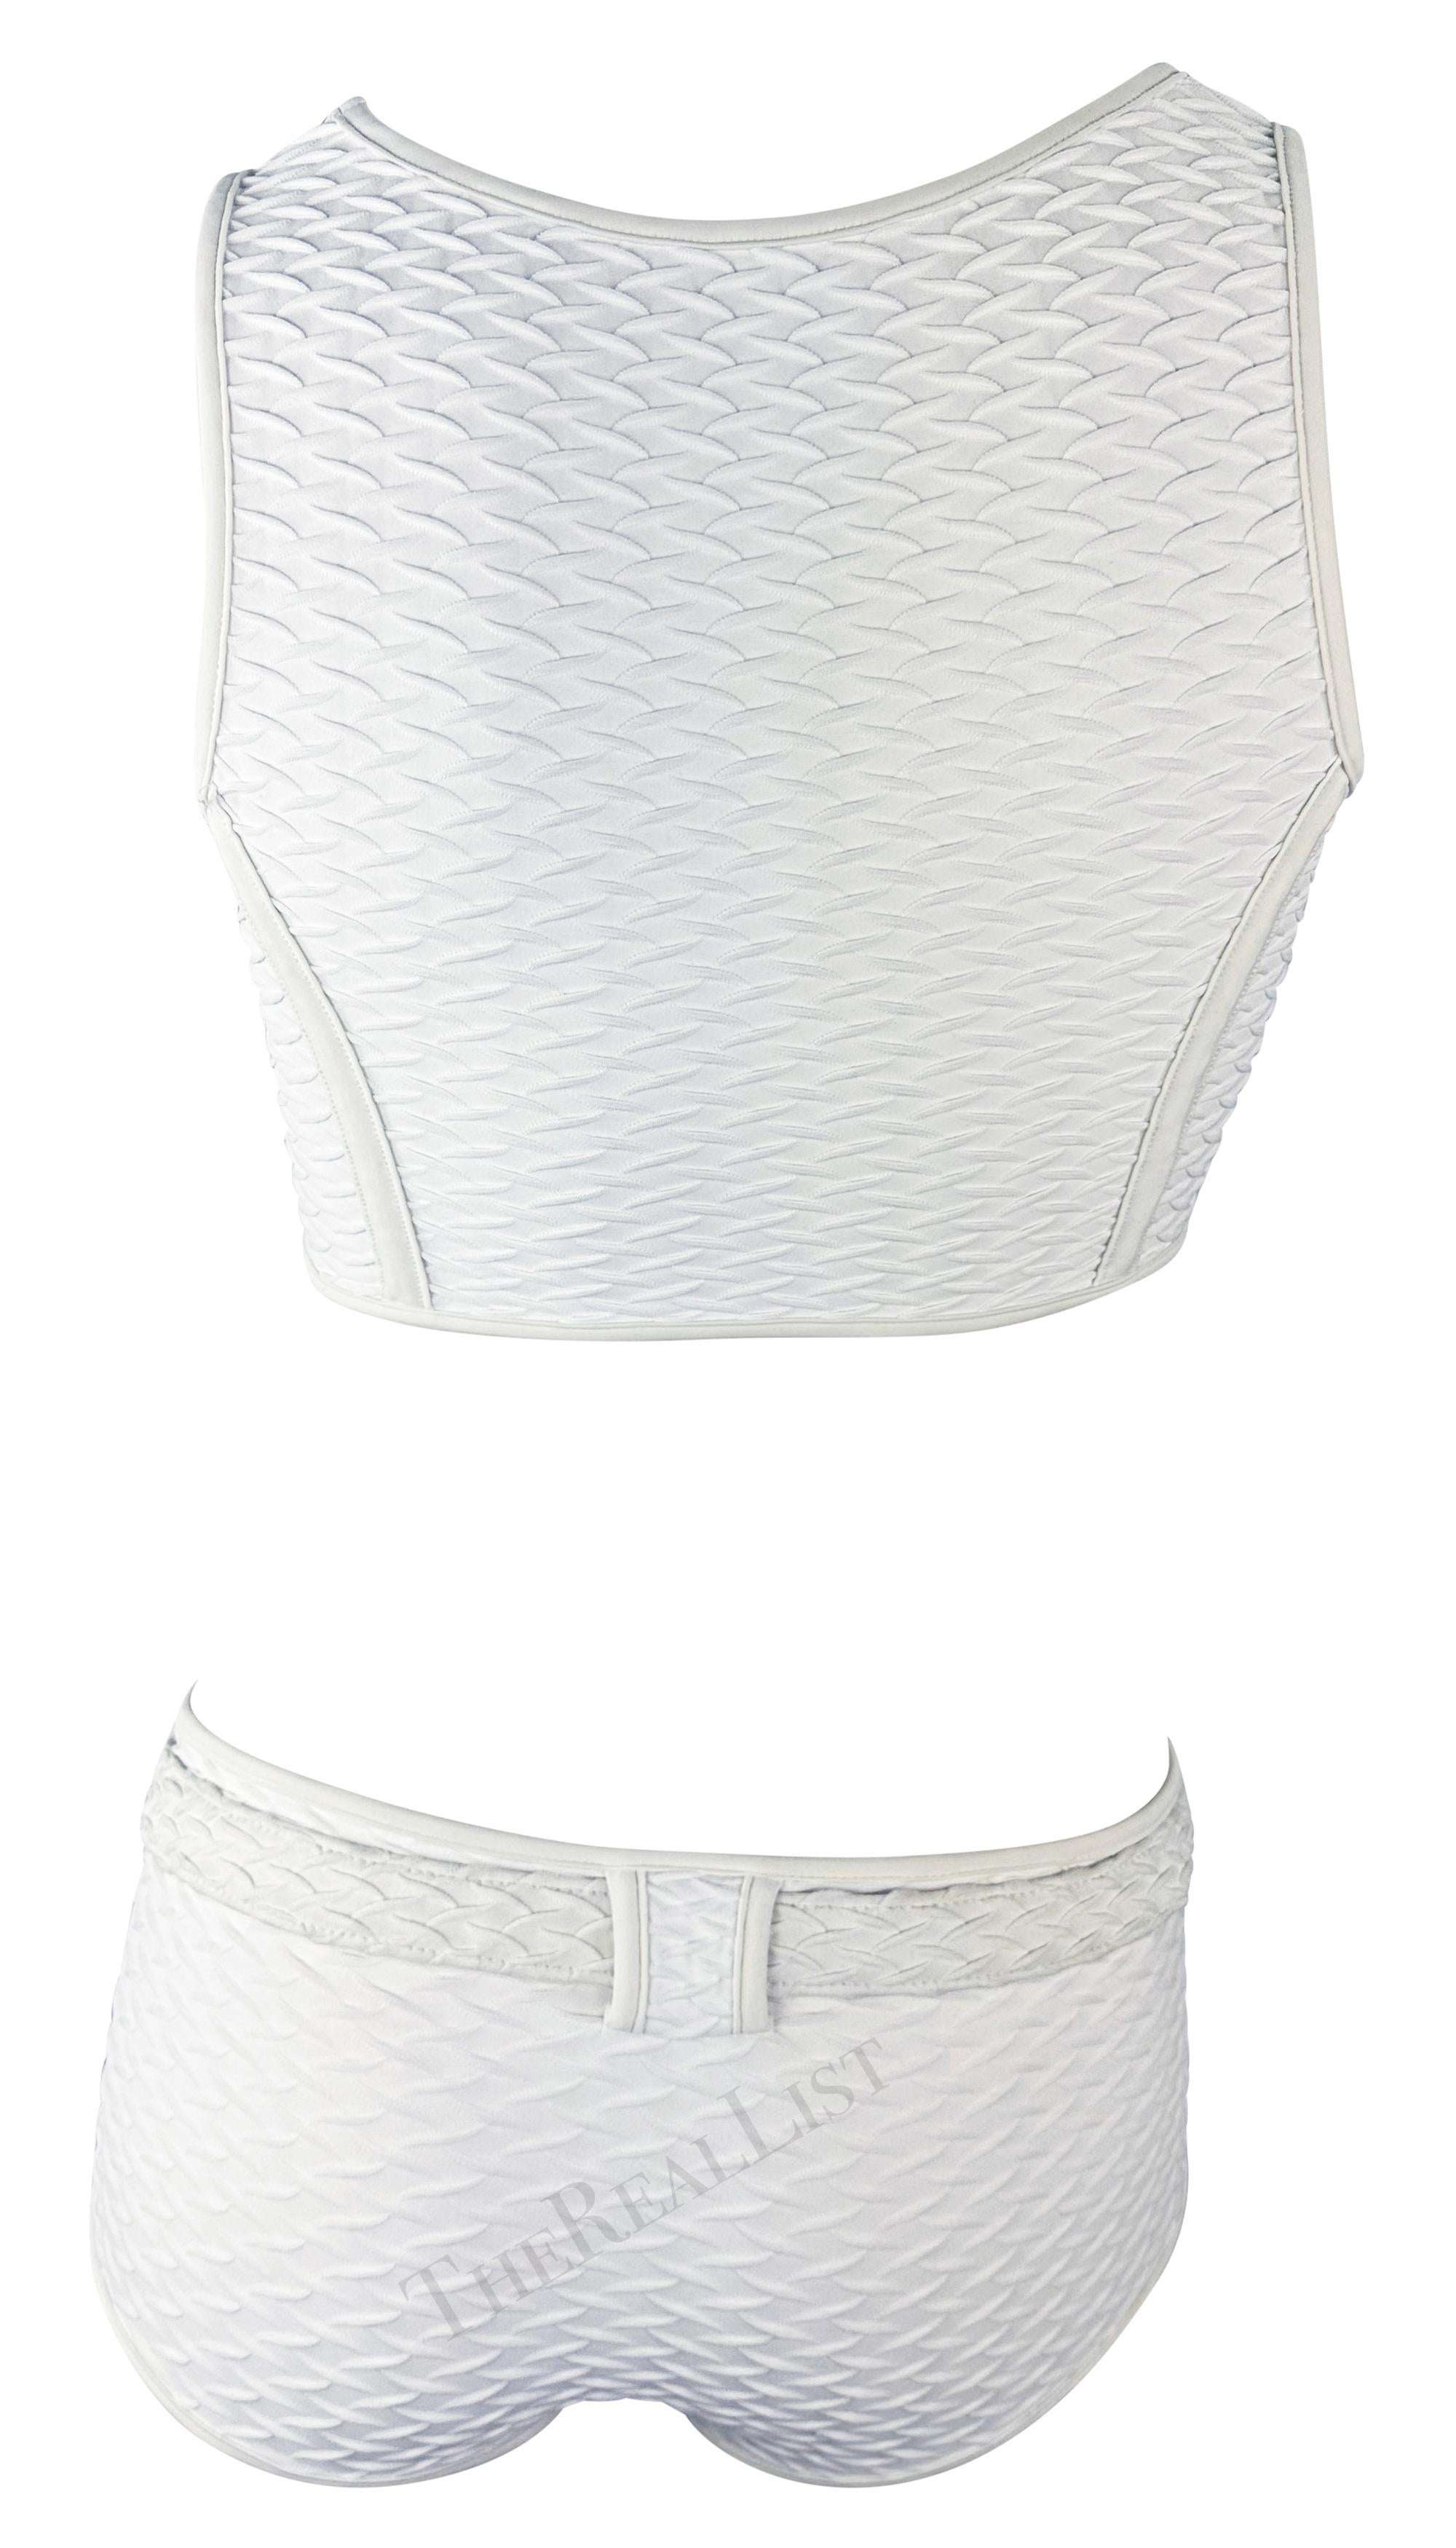 Women's S/S 1996 Gucci by Tom Ford GG Belted Bond Girl Two-Piece Swim Shorts Set For Sale